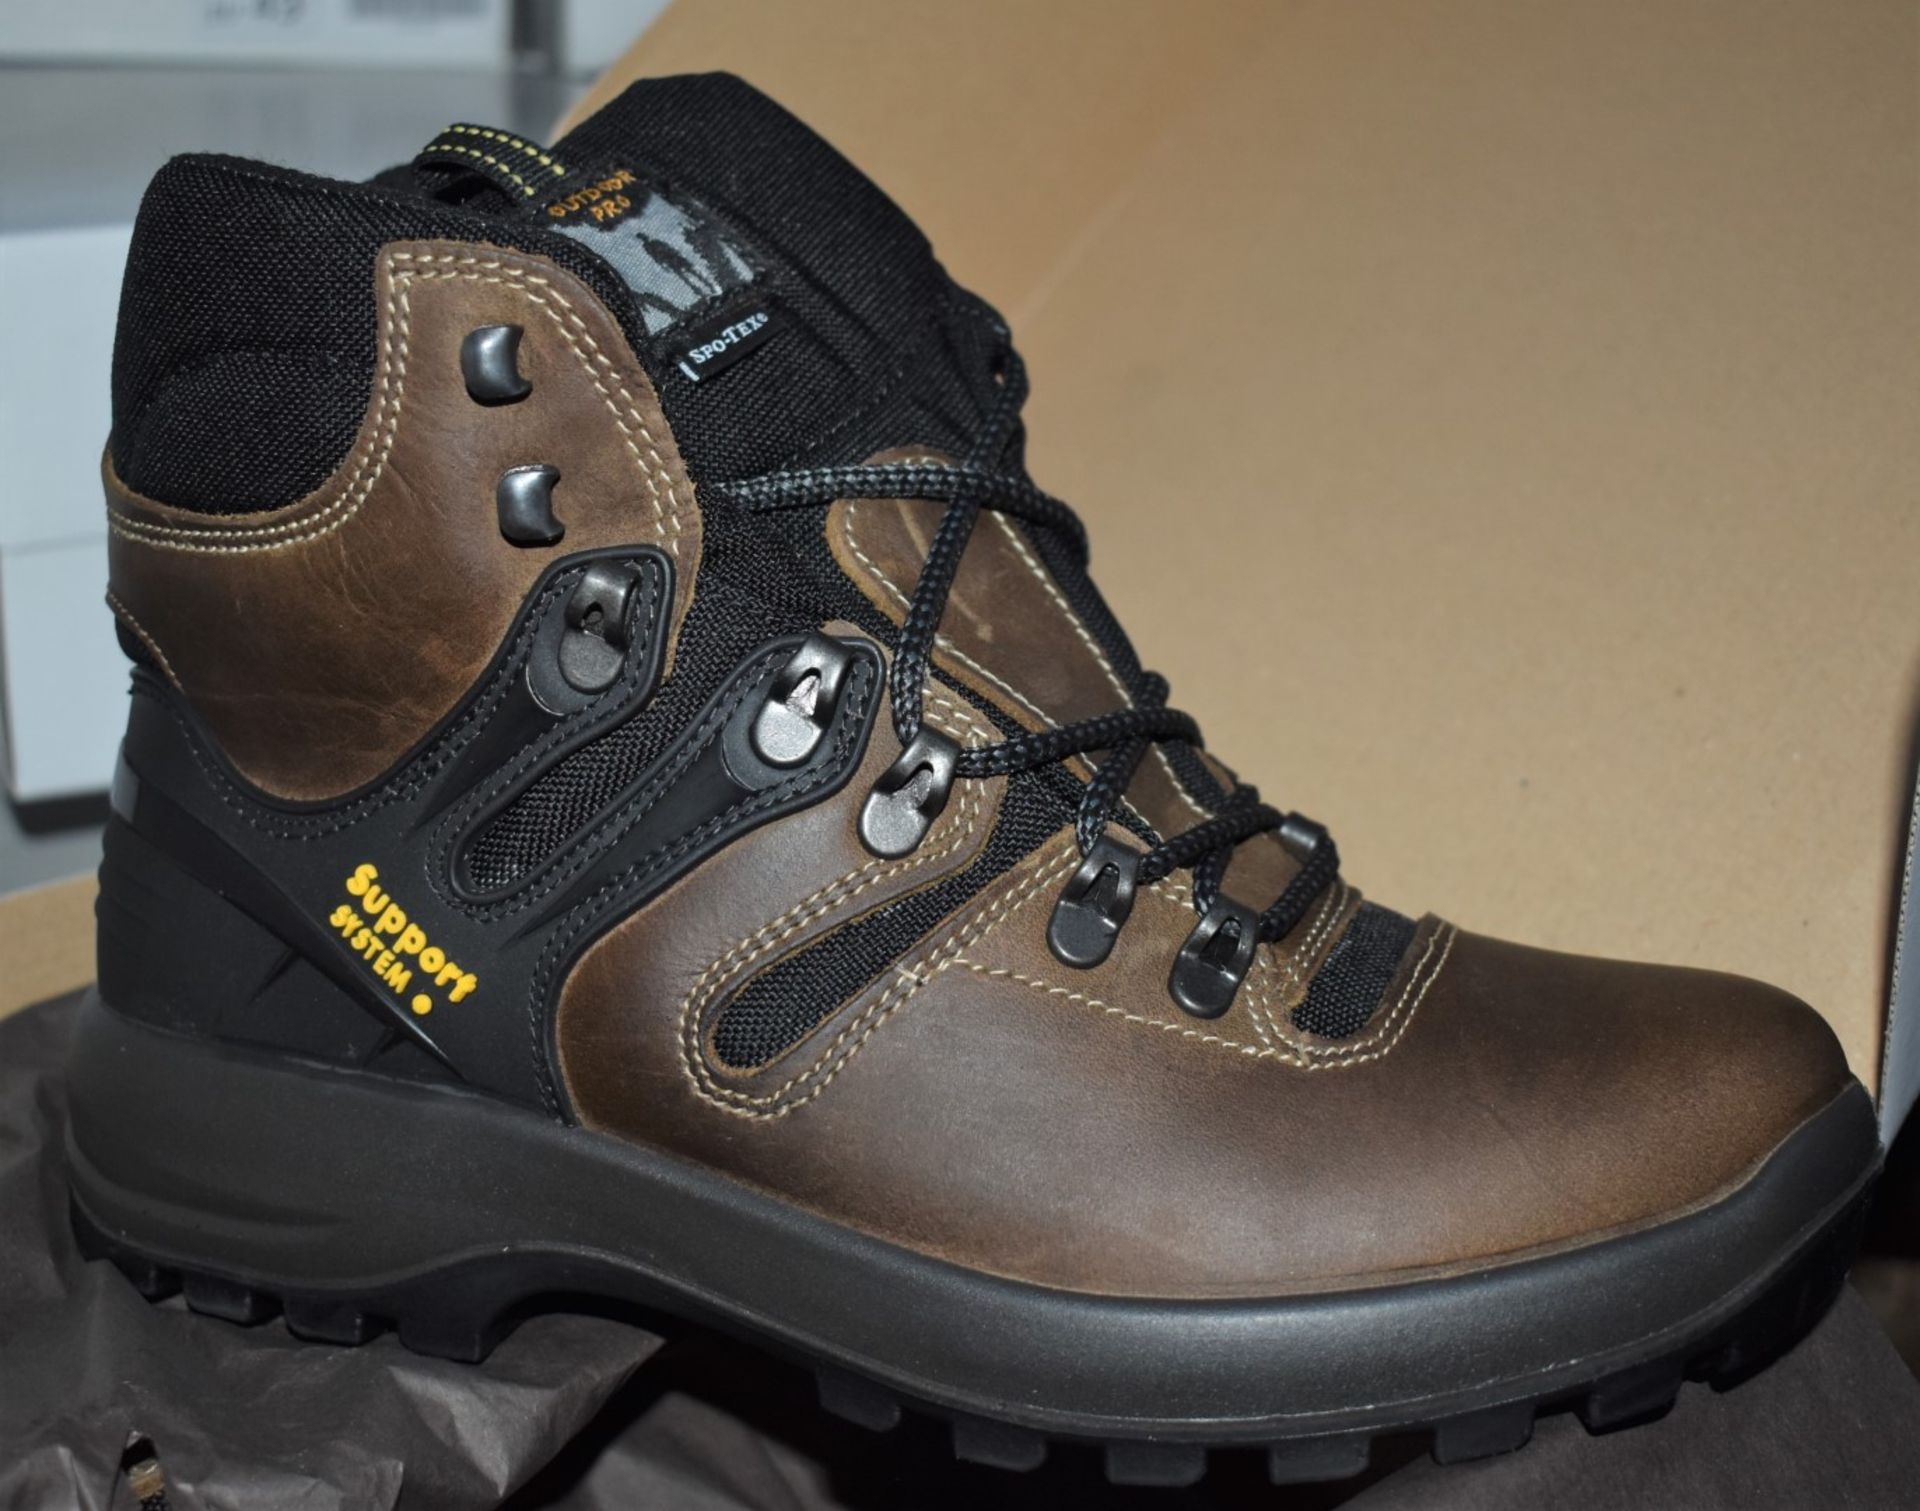 1 x Pair of Mens VIBRAM Walking Boots - Outdoor Pro Spo-Tex Trekking Boots With Support System - - Image 5 of 5